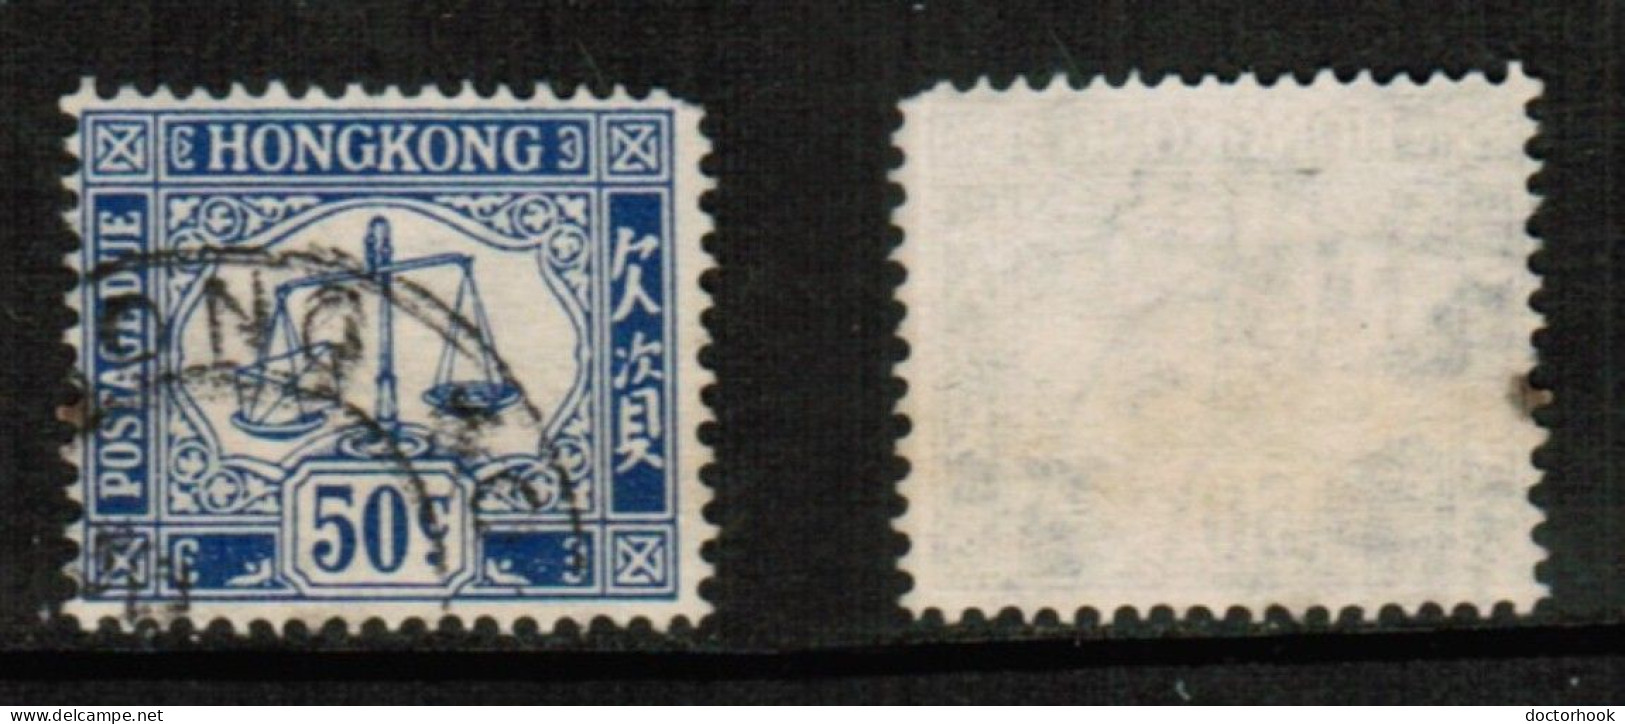 HONG KONG   Scott # J 12 USED (CONDITION AS PER SCAN) (Stamp Scan # 924-6) - Postage Due